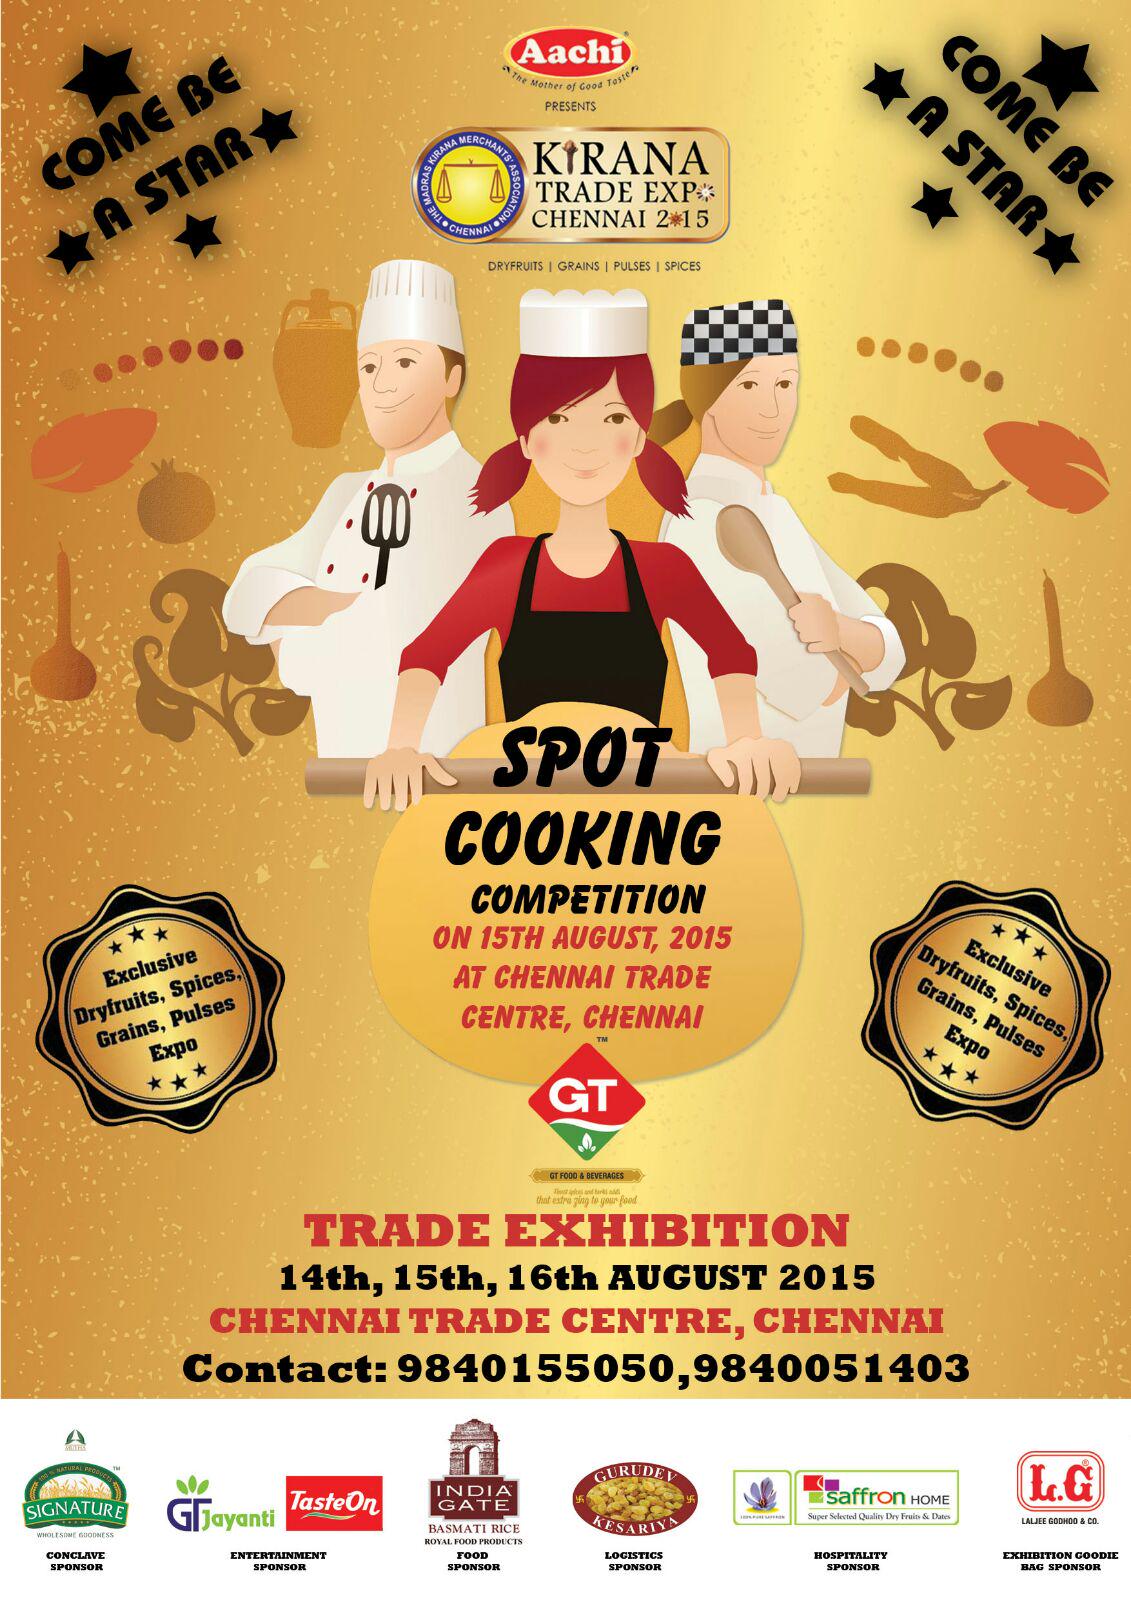 Cooks competition. Cooking Competition. Cookery Competition. Cooking Competition for Kids. ESL Cooking Competition.